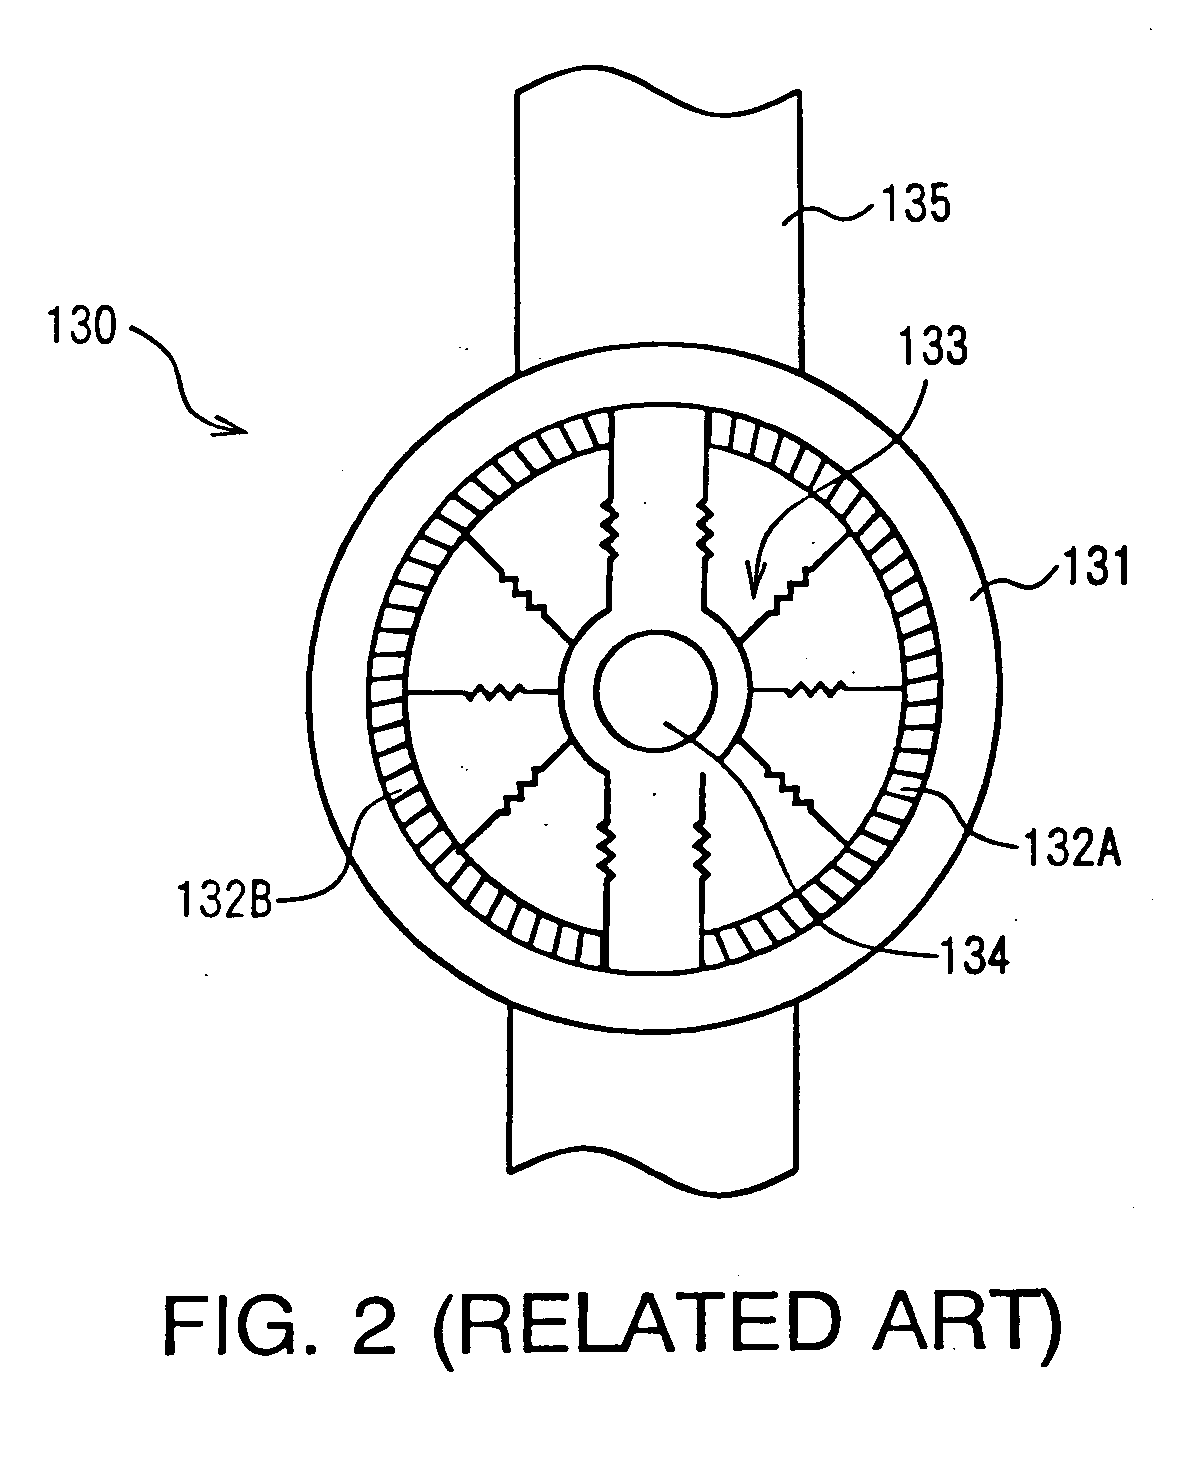 Robot apparatus, and load absorbing apparatus and method